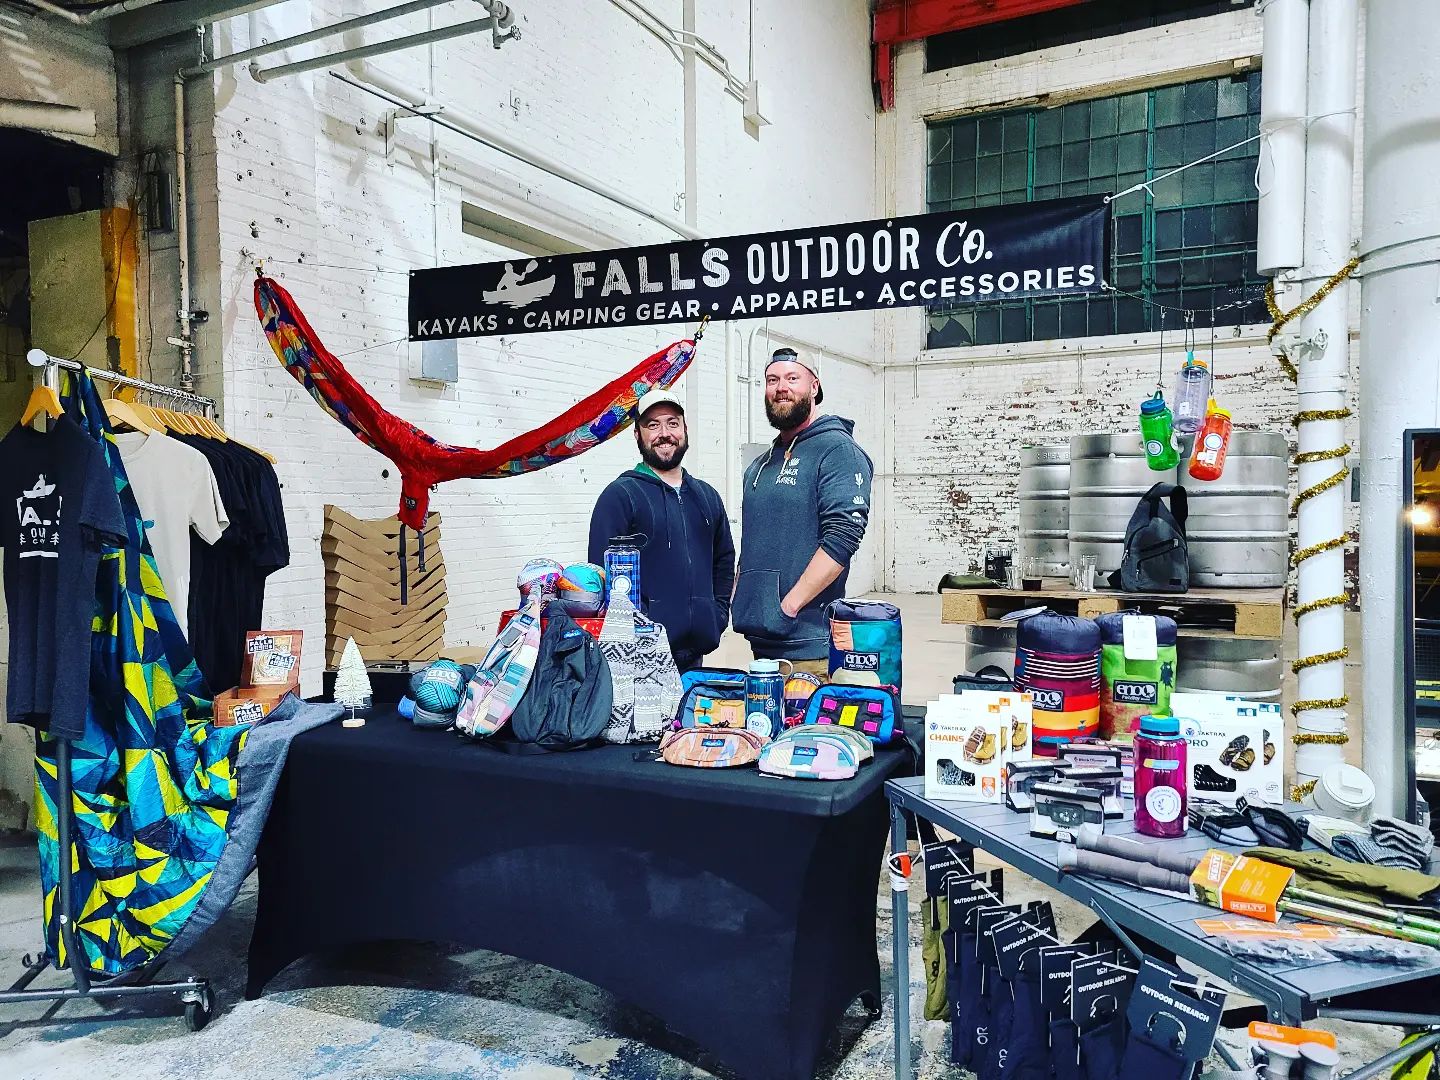 JT Haught and Jared at an event for Falls Outdoor Company